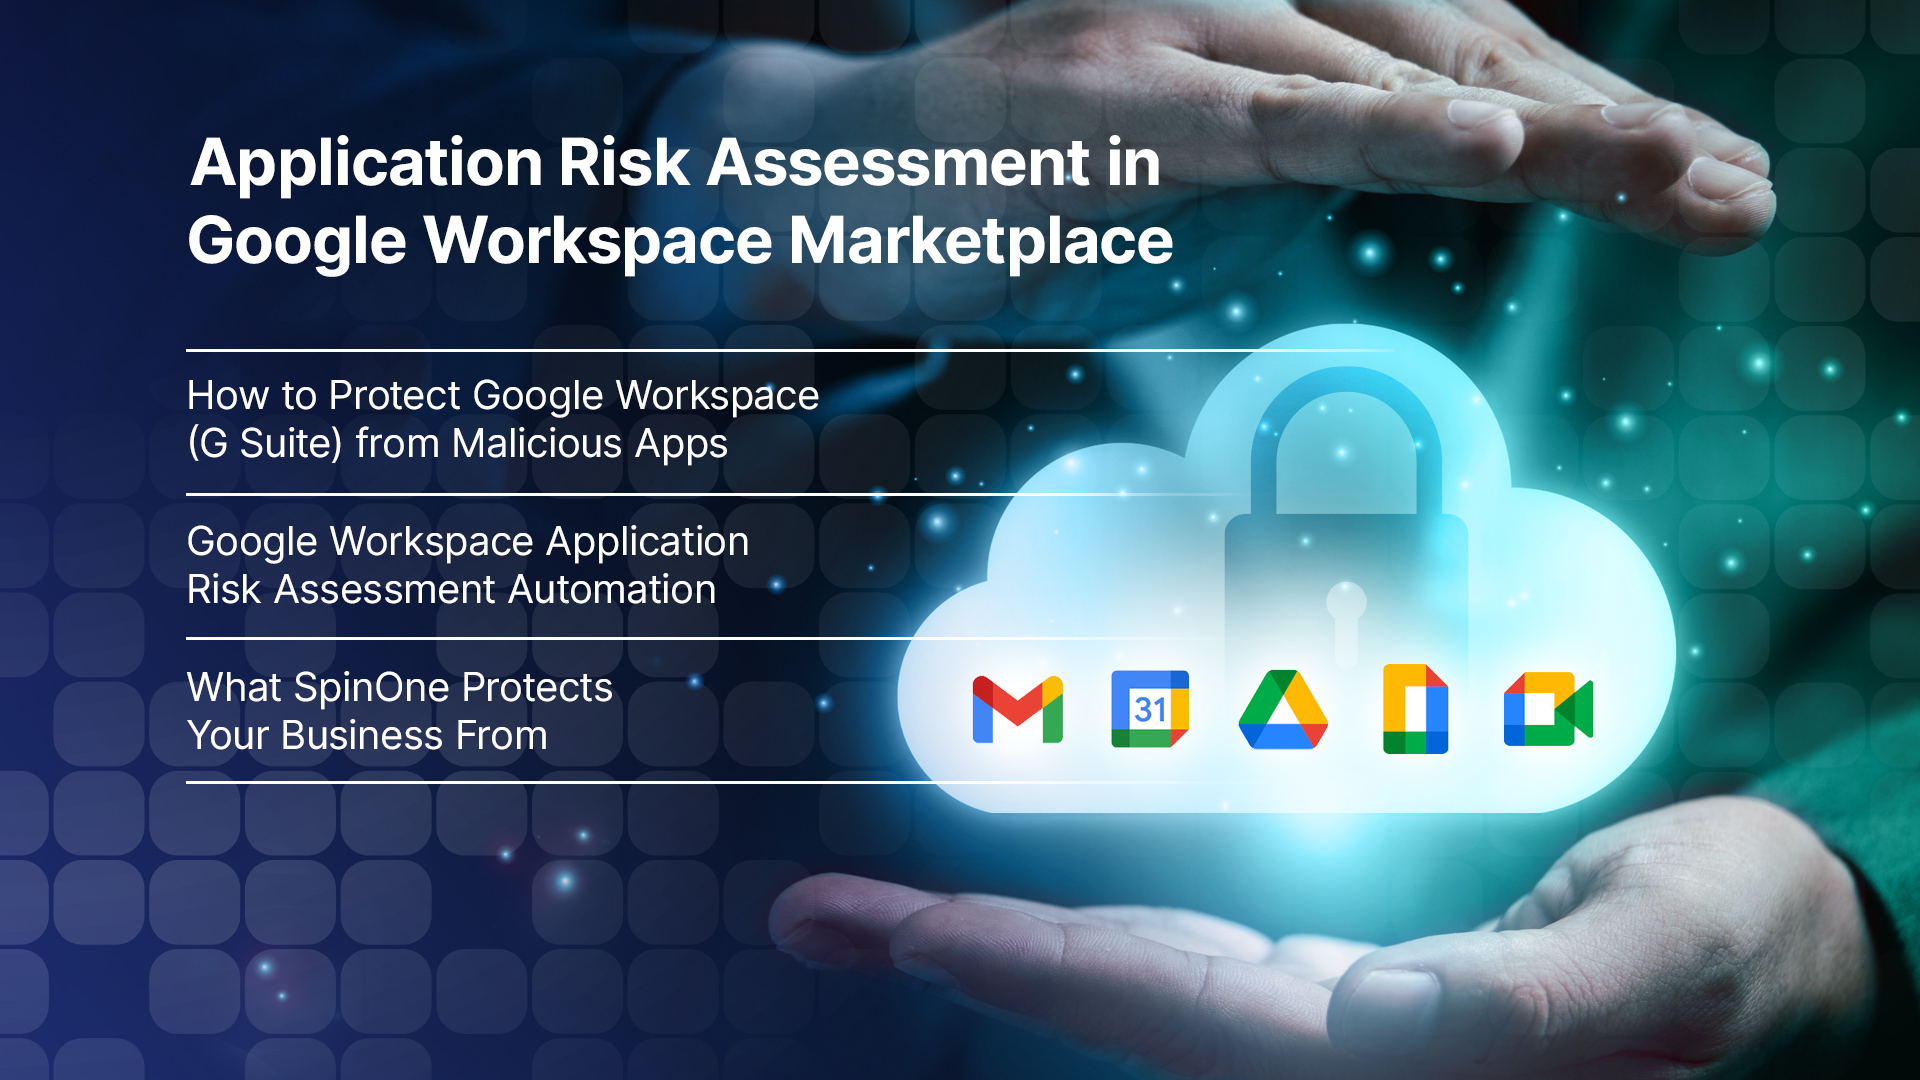 How to Protect Google Workspace (G Suite) from Malicious Apps